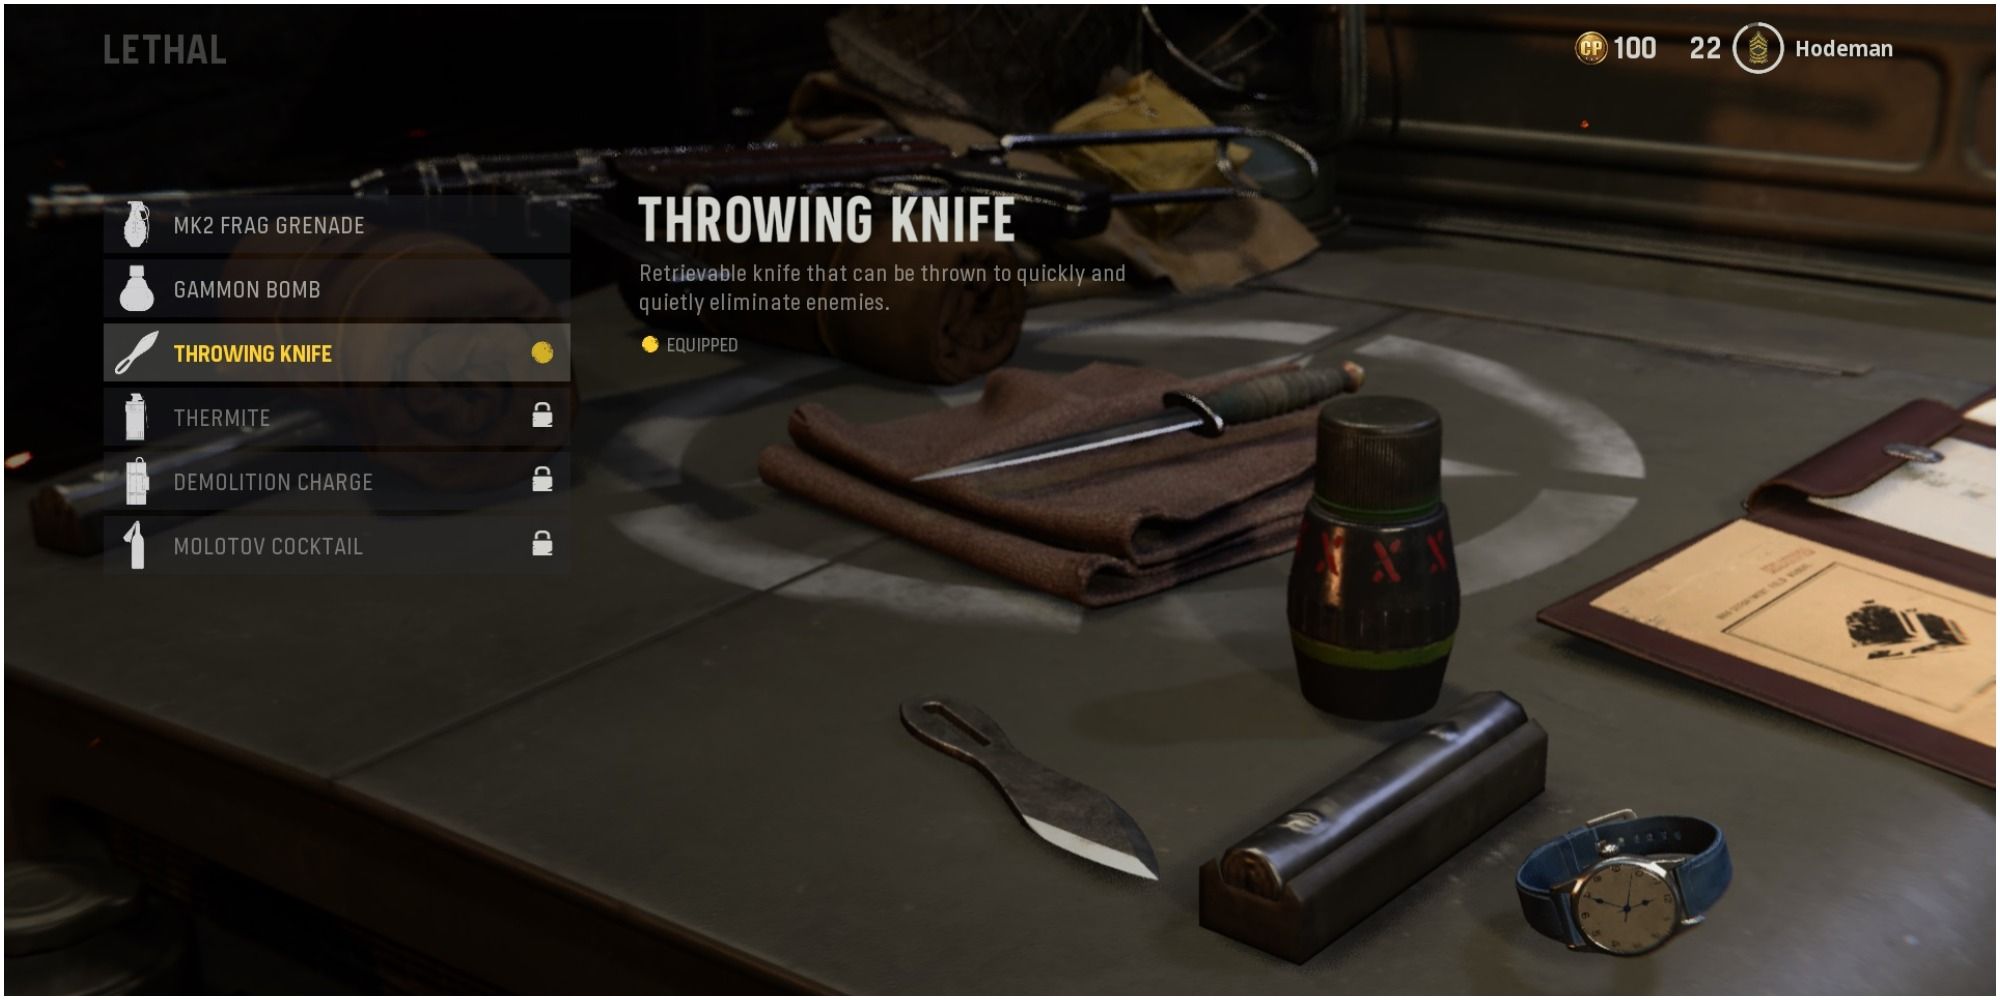 Call Of Duty Vanguard Description Of The Lethal Throwing Knife